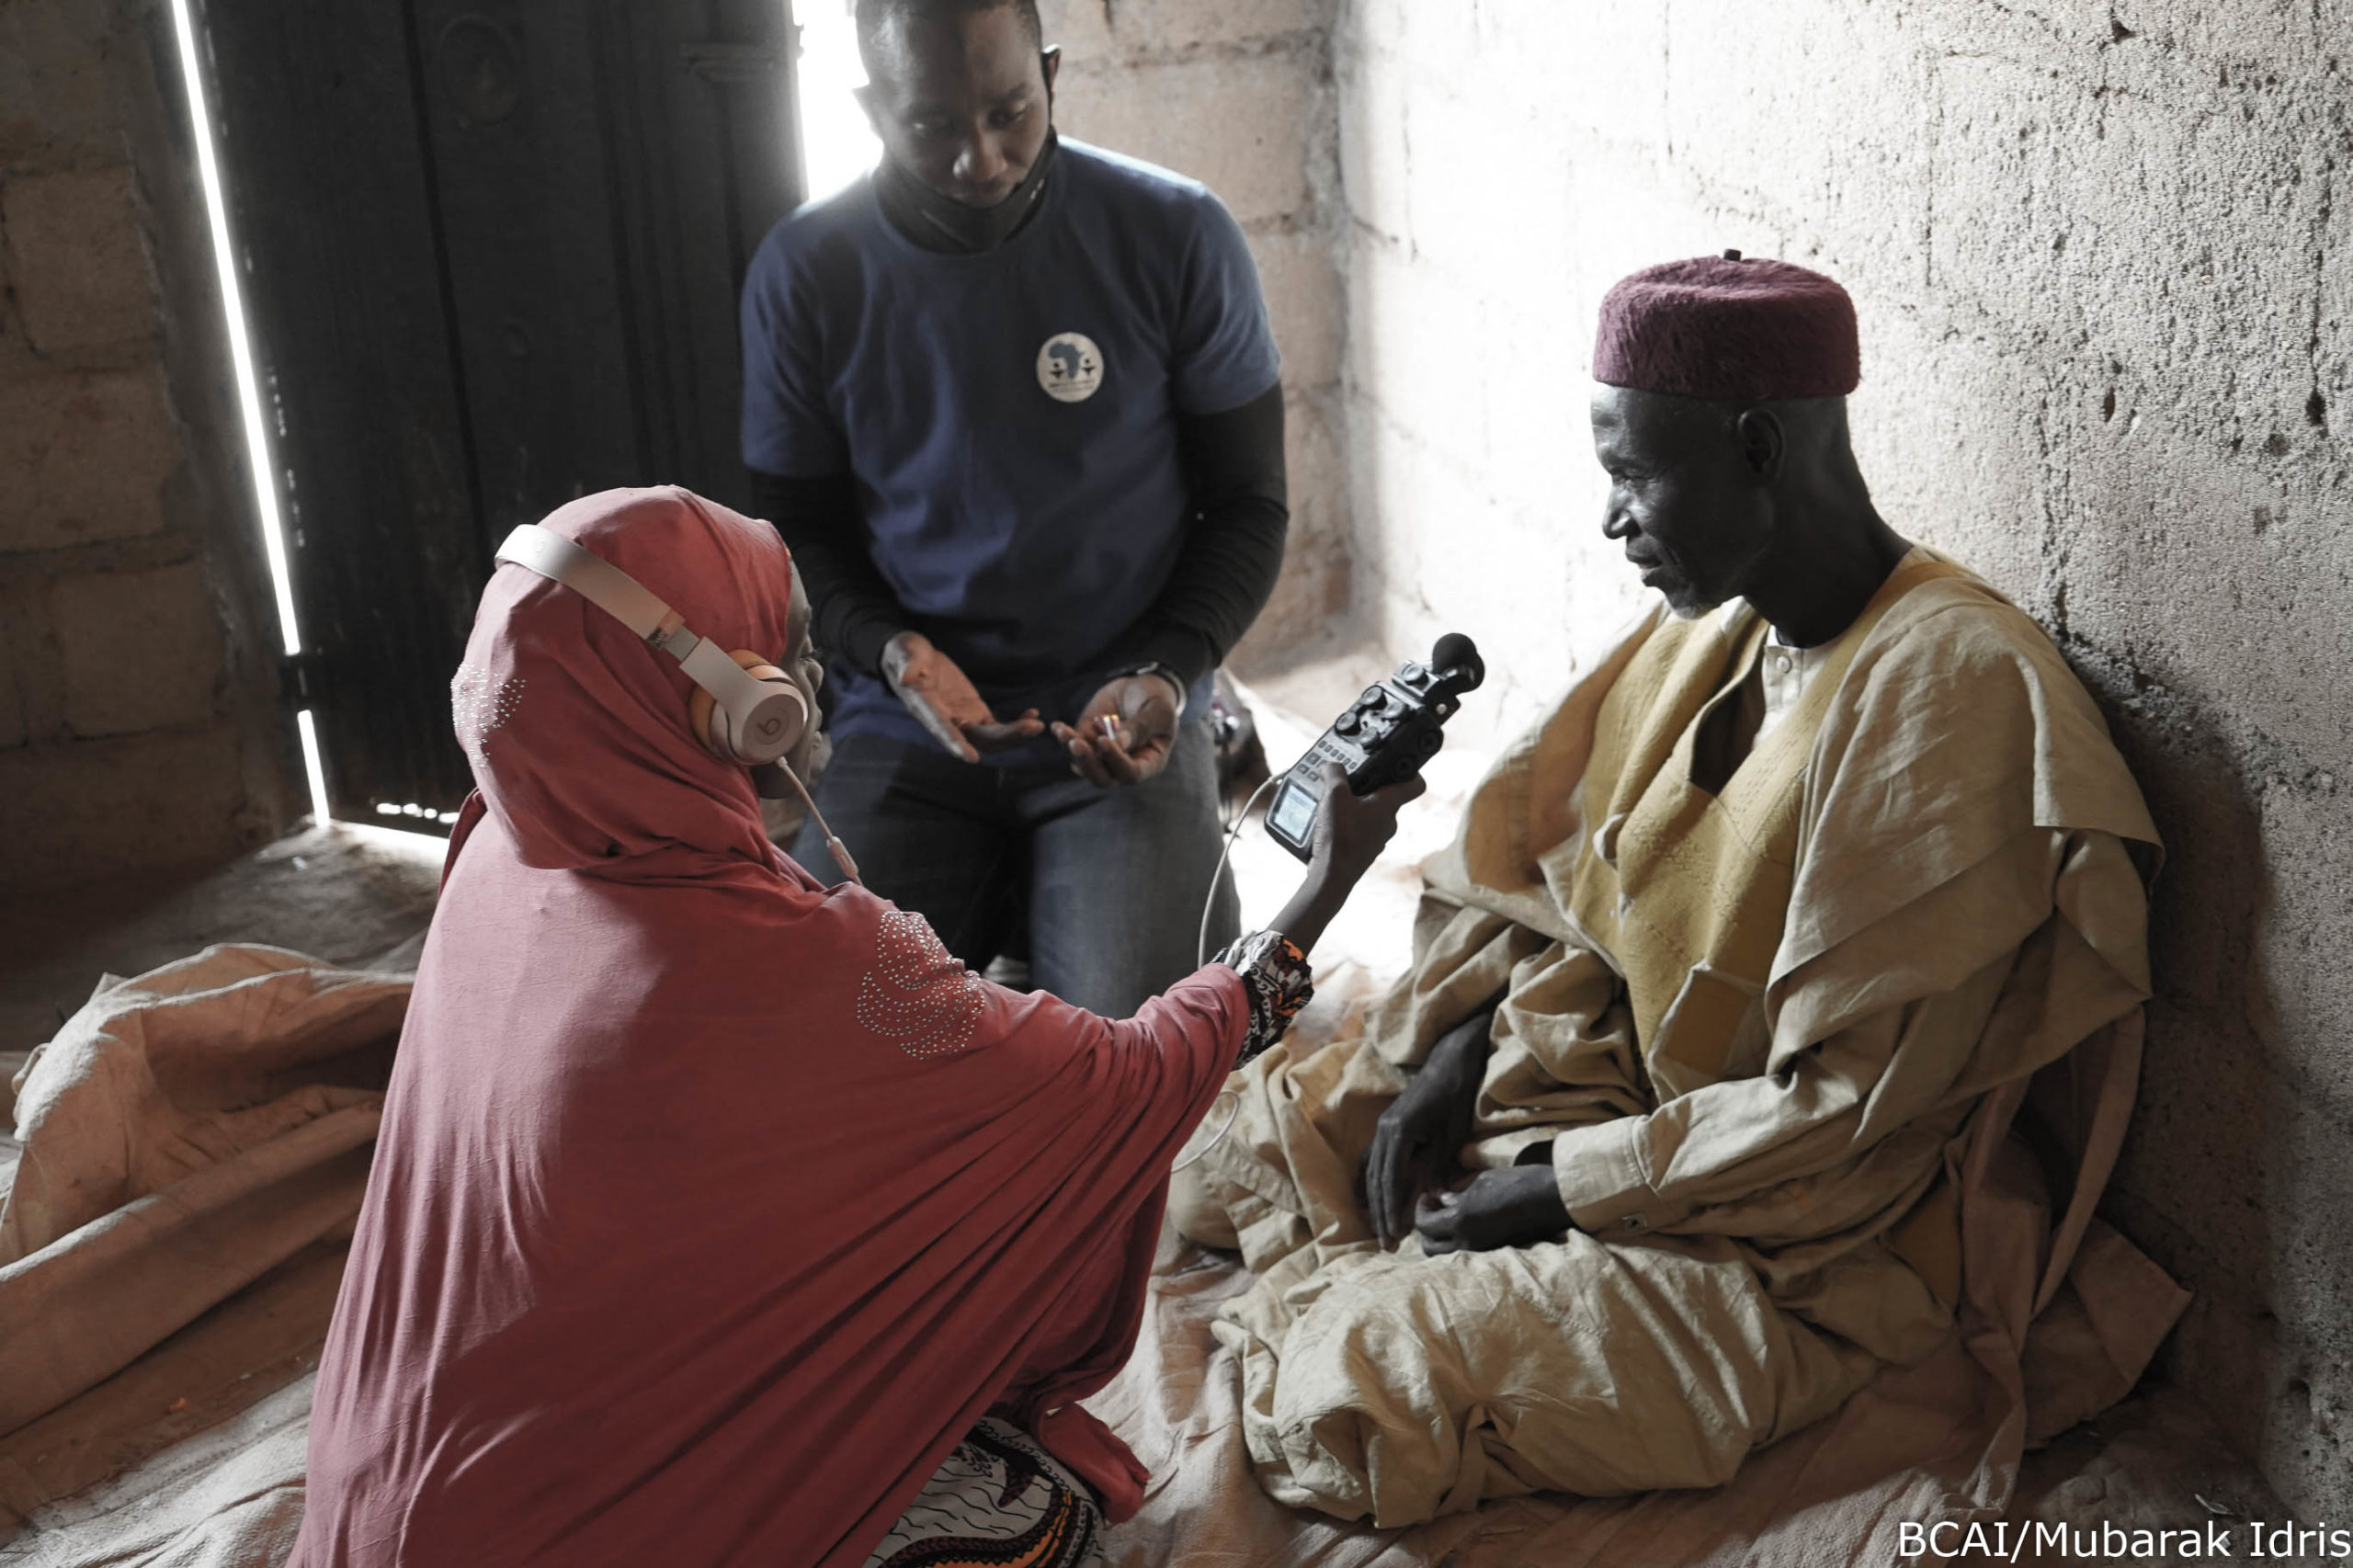 A muslim woman wearing headphones and holding a microphone interviews a man sitting on the ground in 